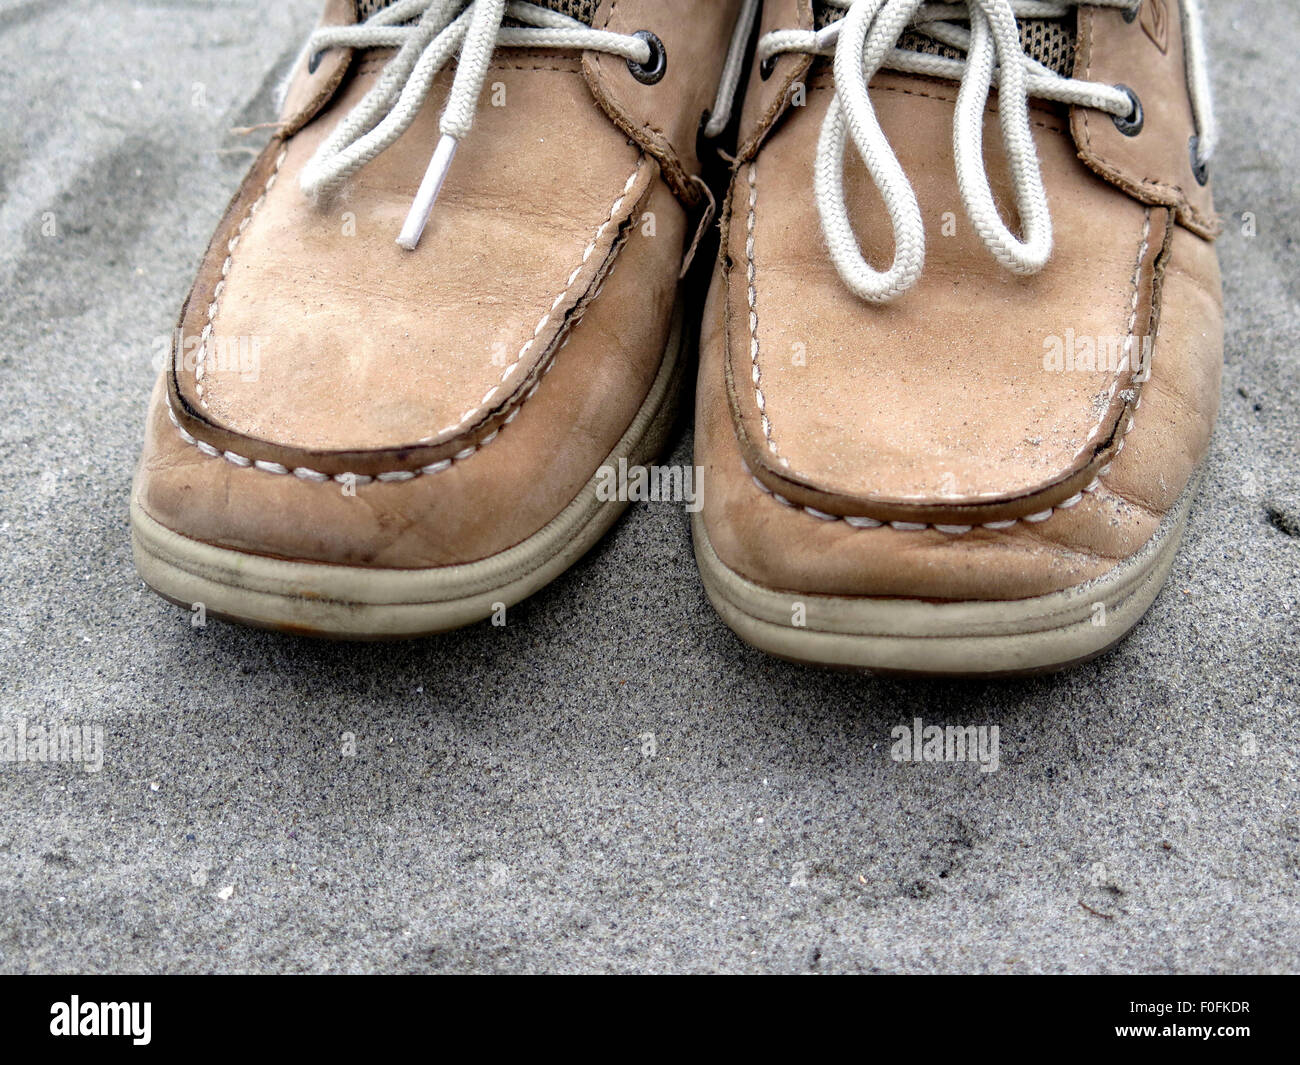 Deck shoes in sand Stock Photo - Alamy